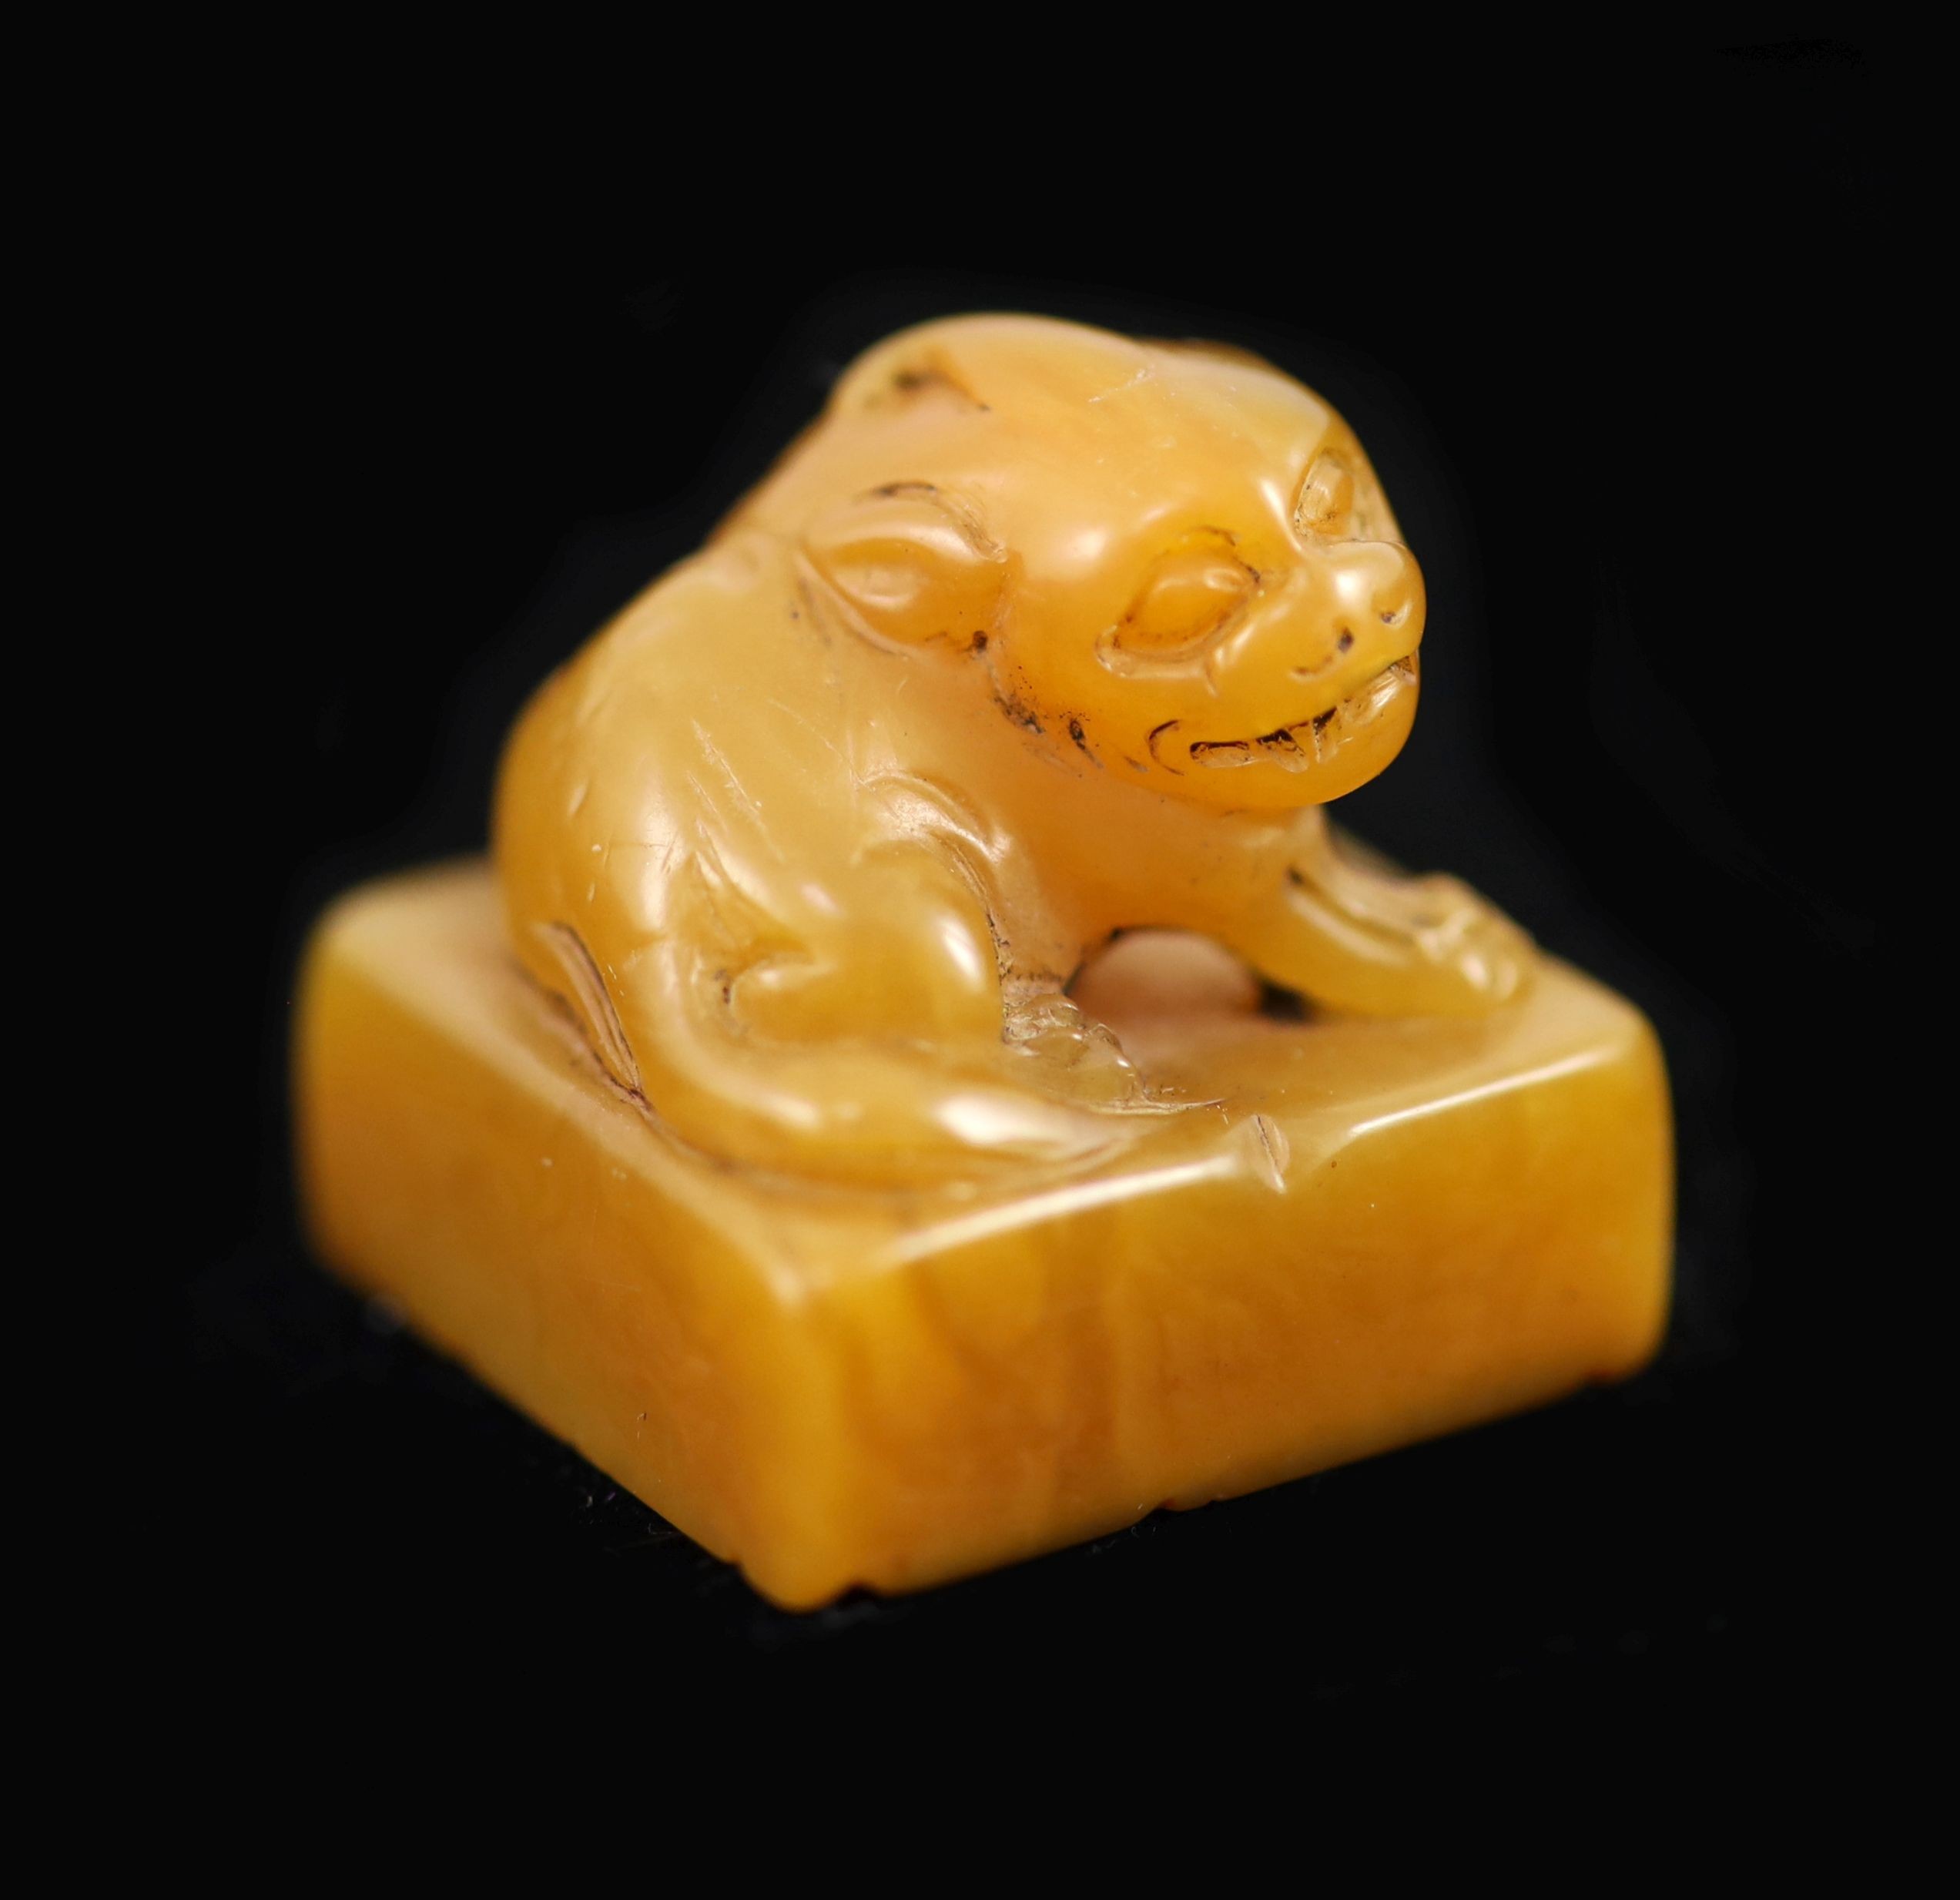 A Chinese tianhuang stone square seal, 2.2 cm wide